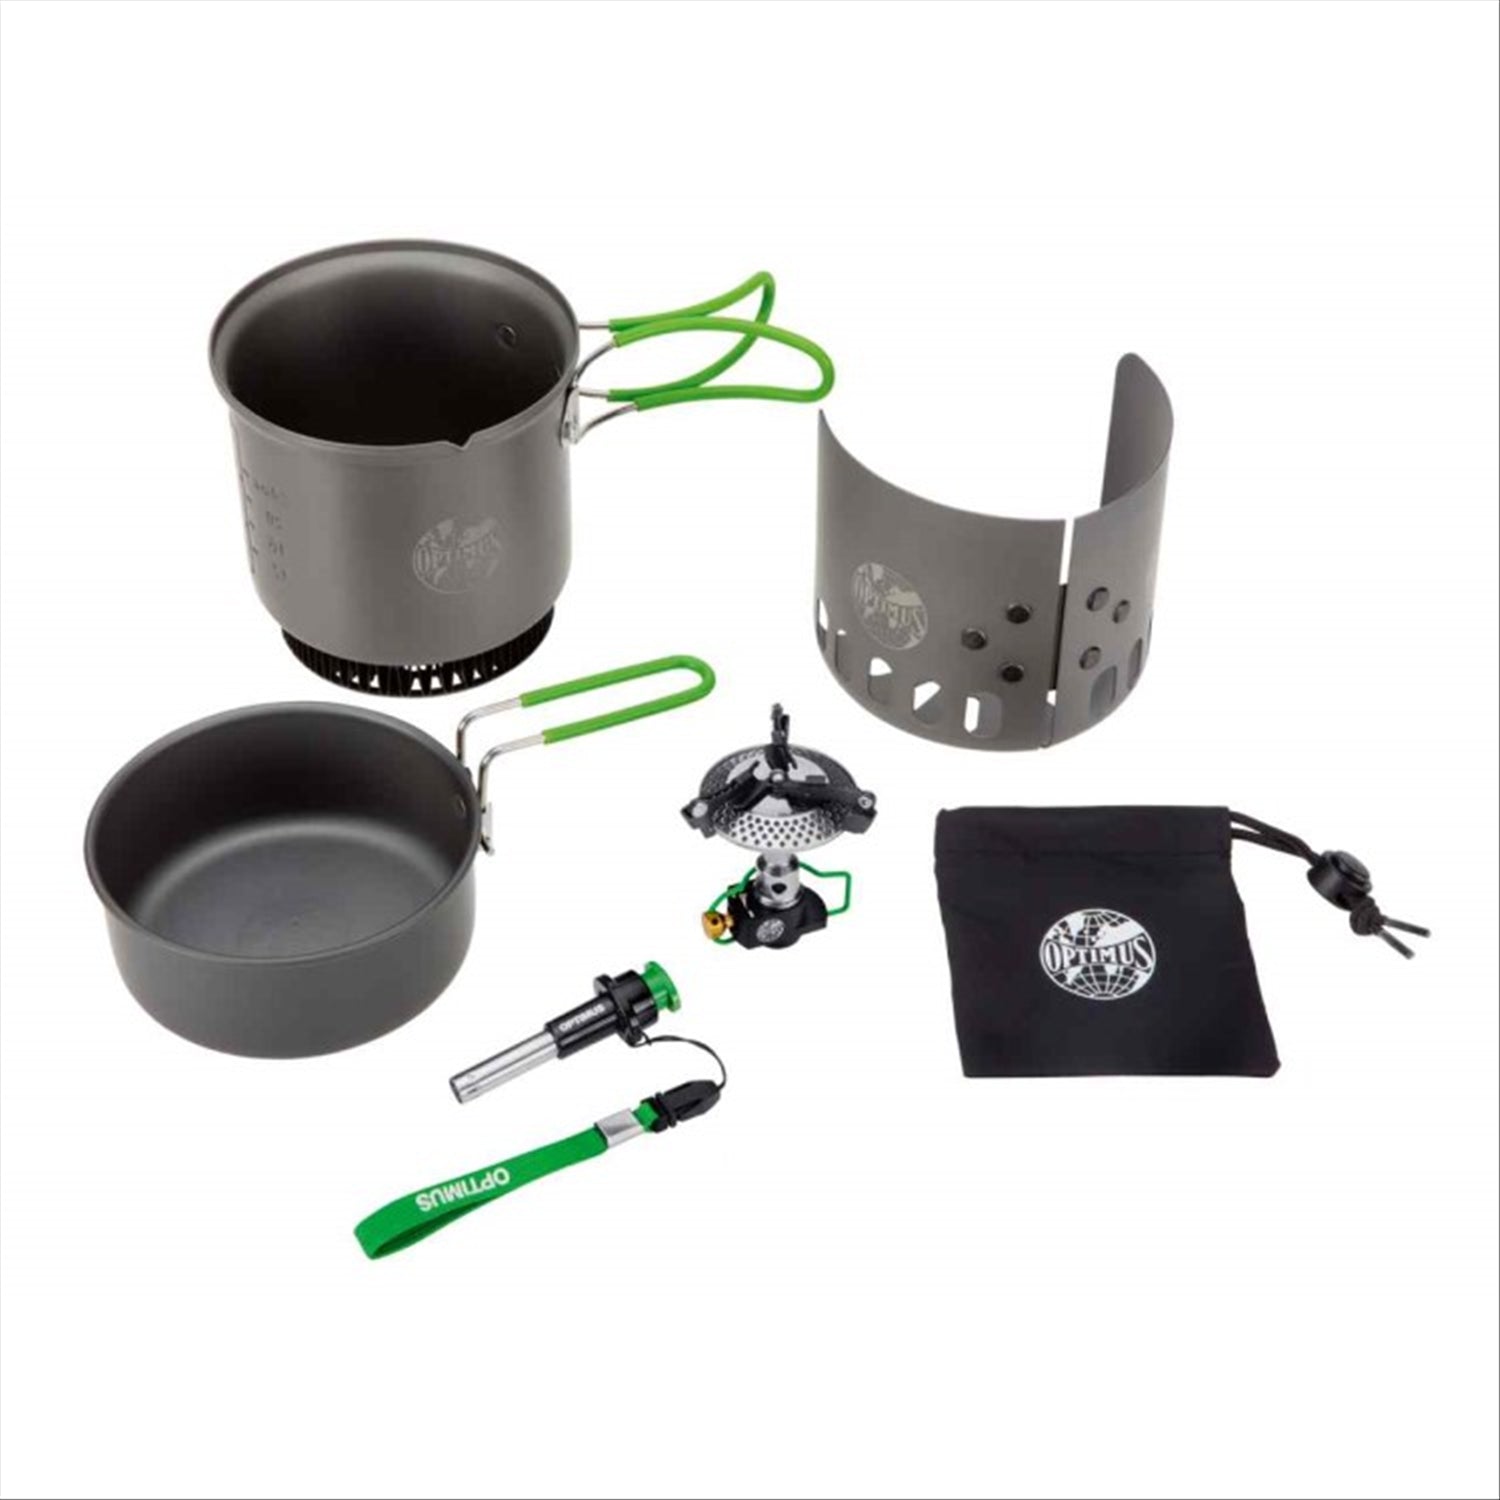 Optimus Elektra FE Cook System - CruxLite Stove, Pot, Pan, Windscreen and Ignitor